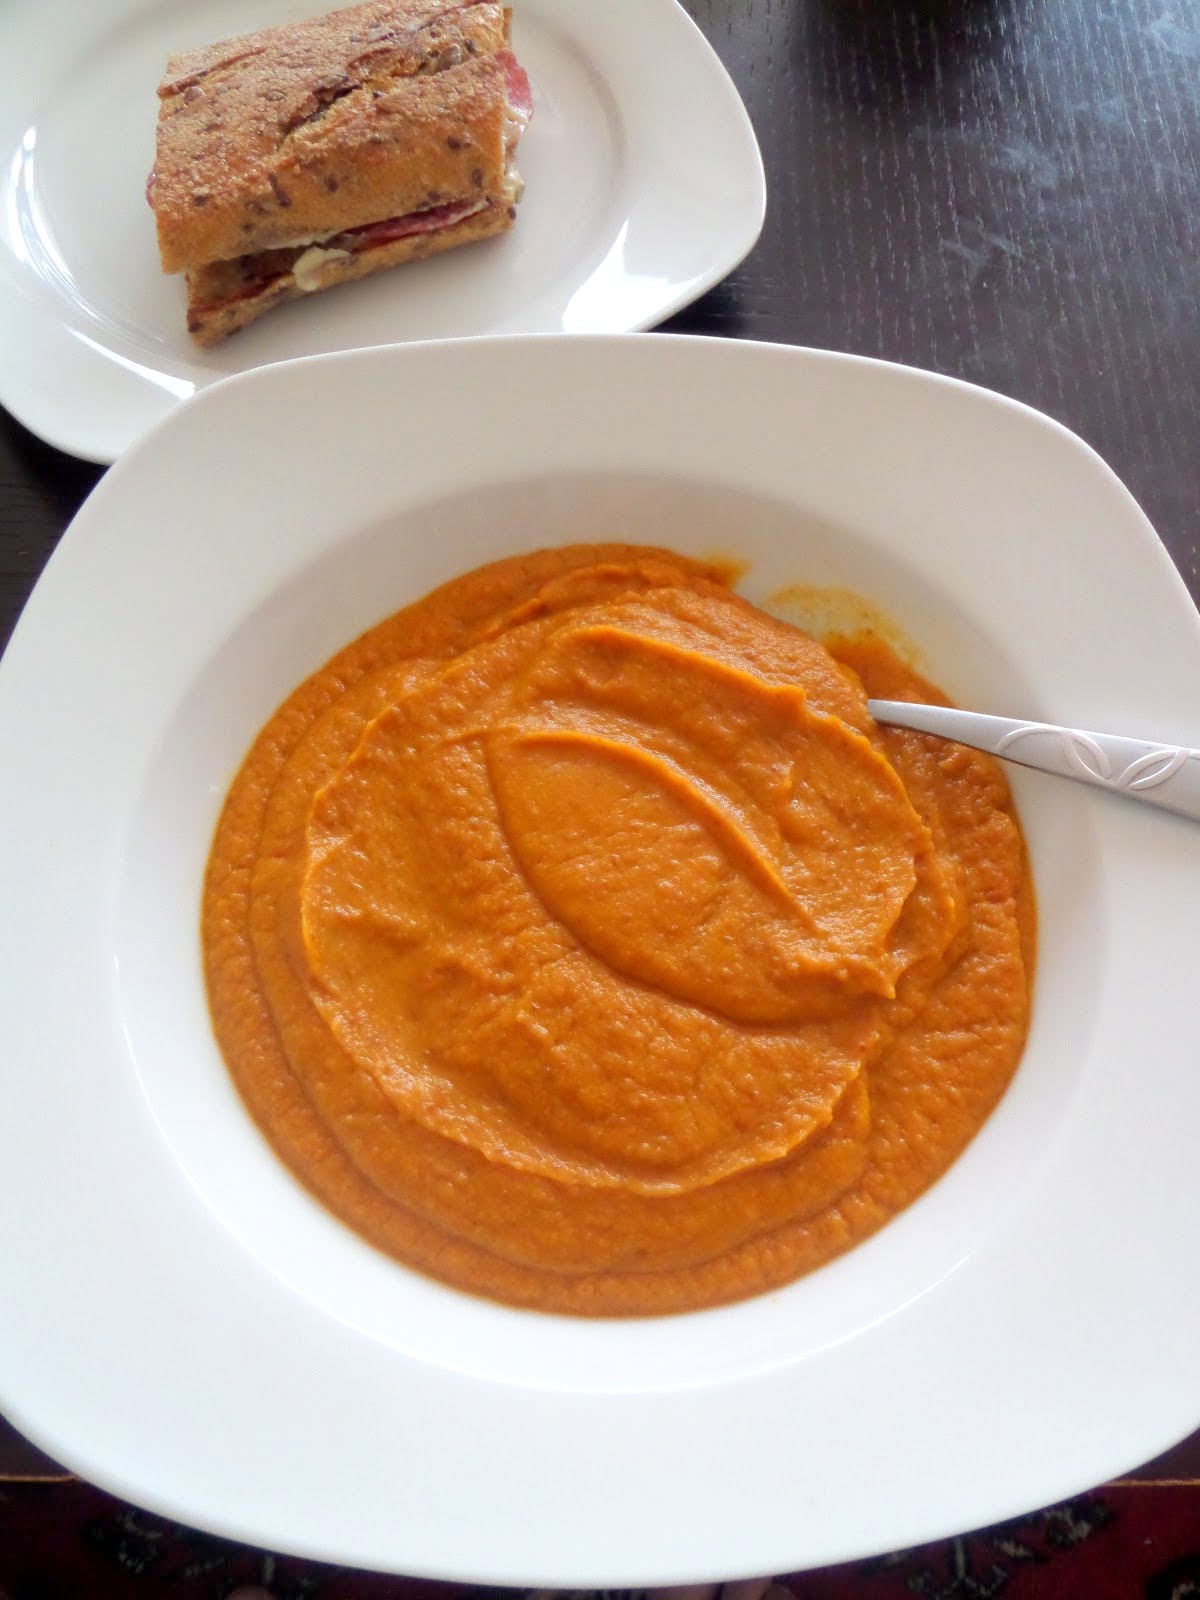 Pureed Carrot Soup:  A creamy, vegan, soup made with pureed carrots, onions, and beans in a vegetable broth with a hint of dill.  It's filling enough for a meal but also great with a small sandwich.